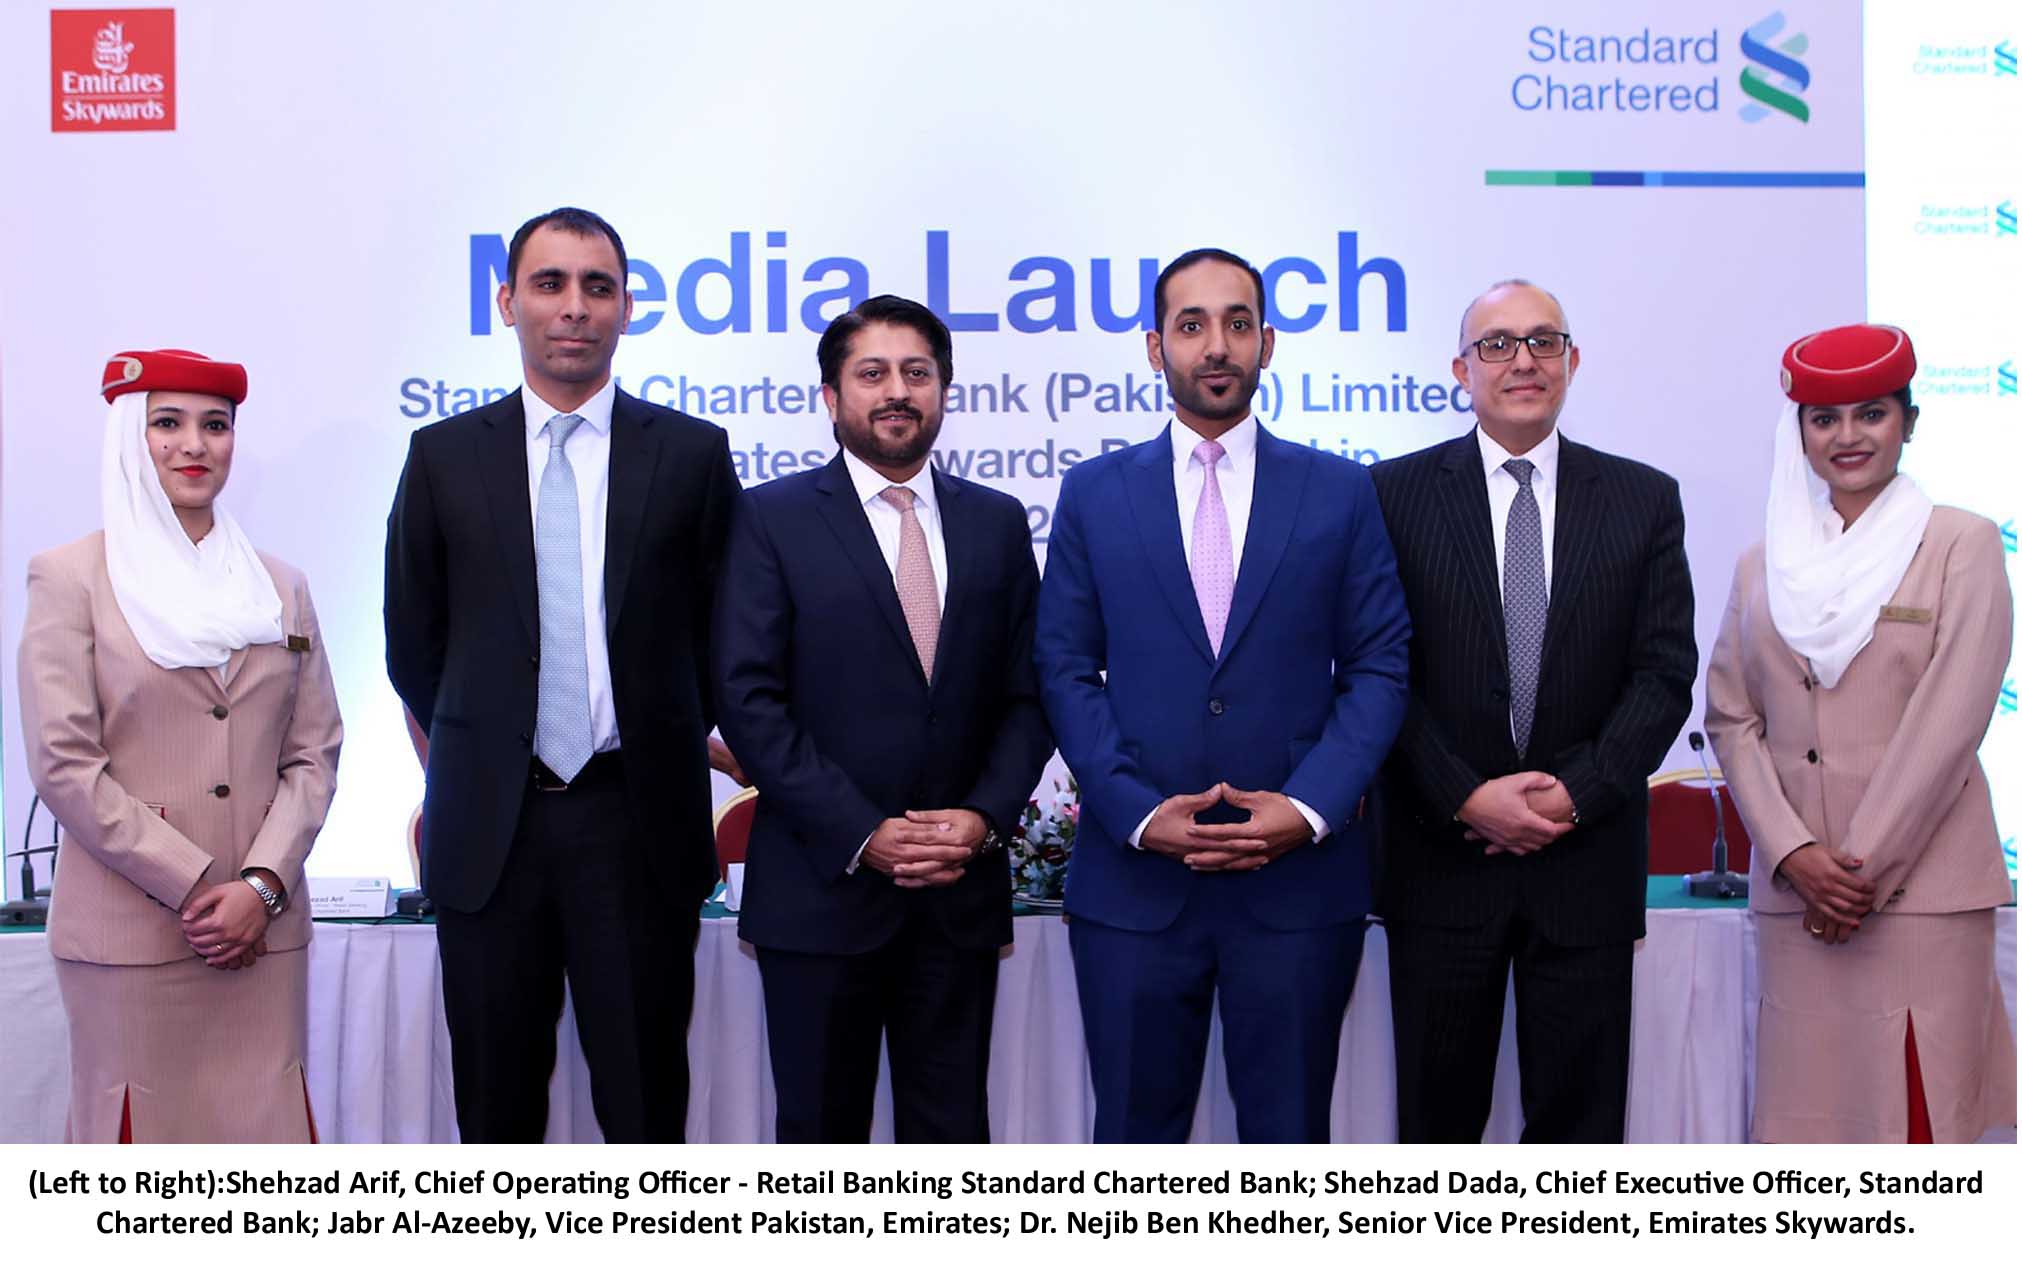 Emirates Skywards and Standard Chartered launch a Credit Card